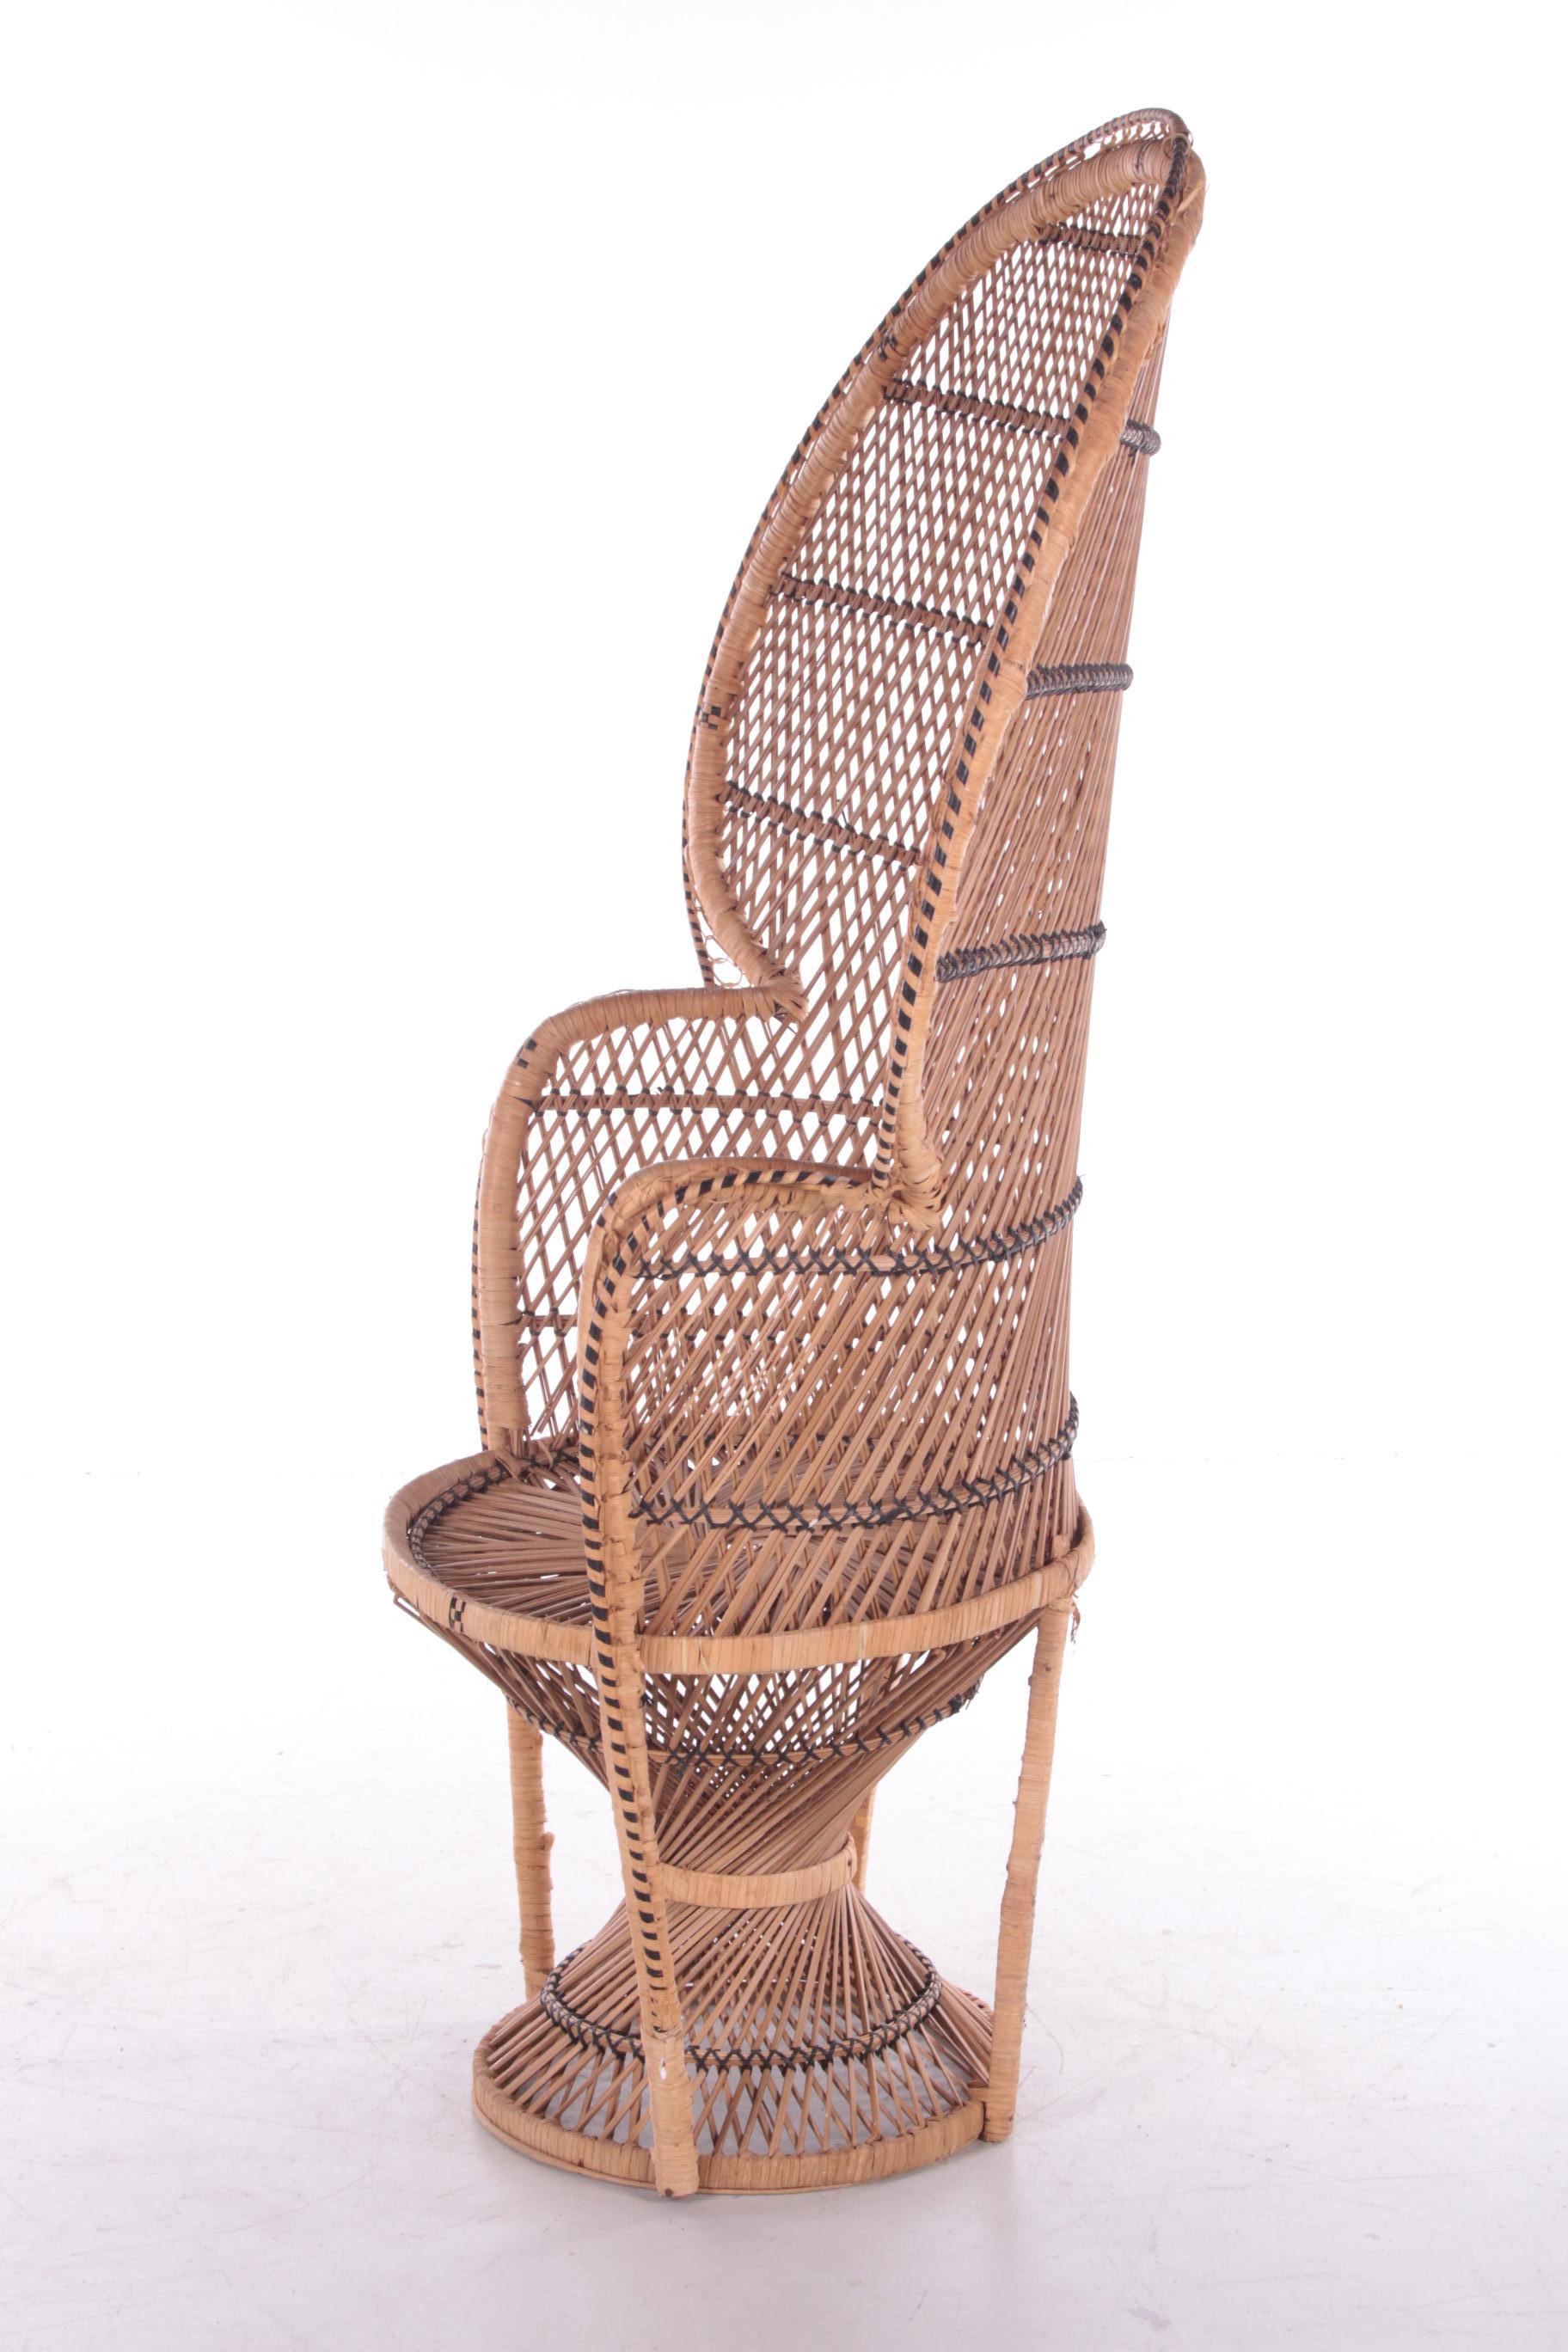 French Vintage Bamboo Peacock Chair Emanuelle Chair, 1970